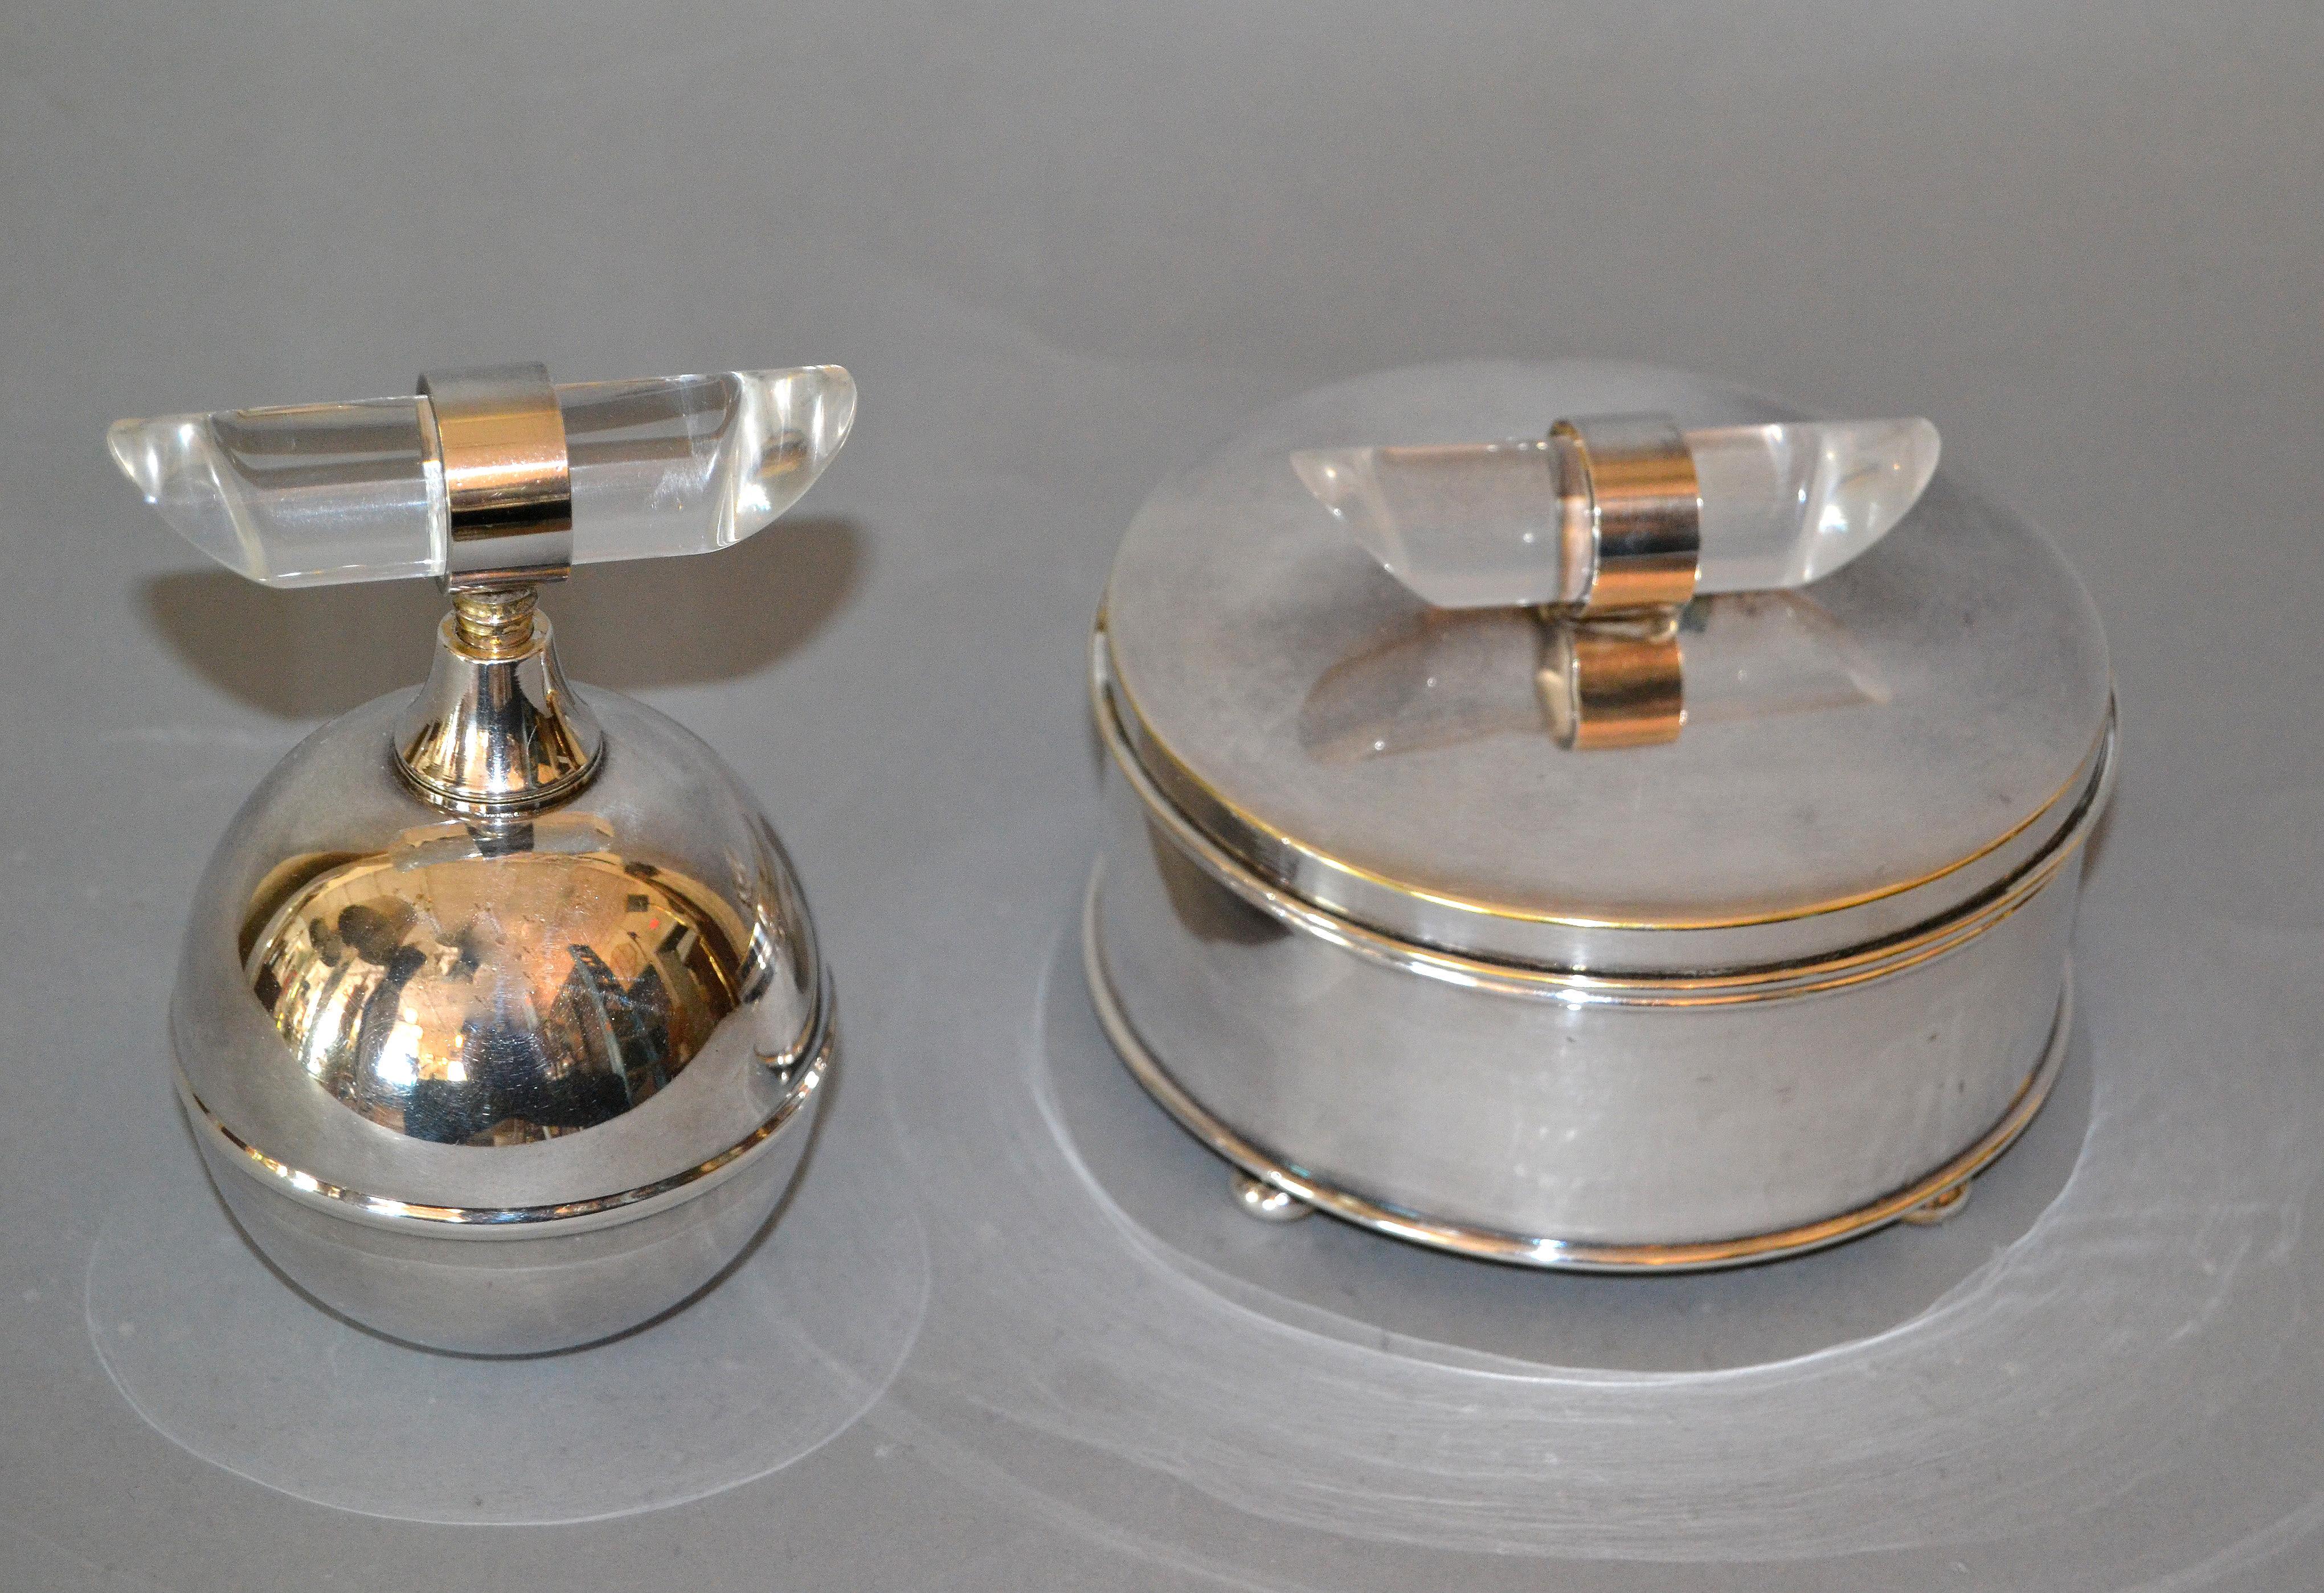 Elegant Mid-Century Modern vanity set comprising a silver plated perfume bottle and a glass bowl with silver plated powder box.
The handcrafted Lucite Knob decorate the two pieces.
Marked underneath Apollo and Apollo A 1740.
These accessories